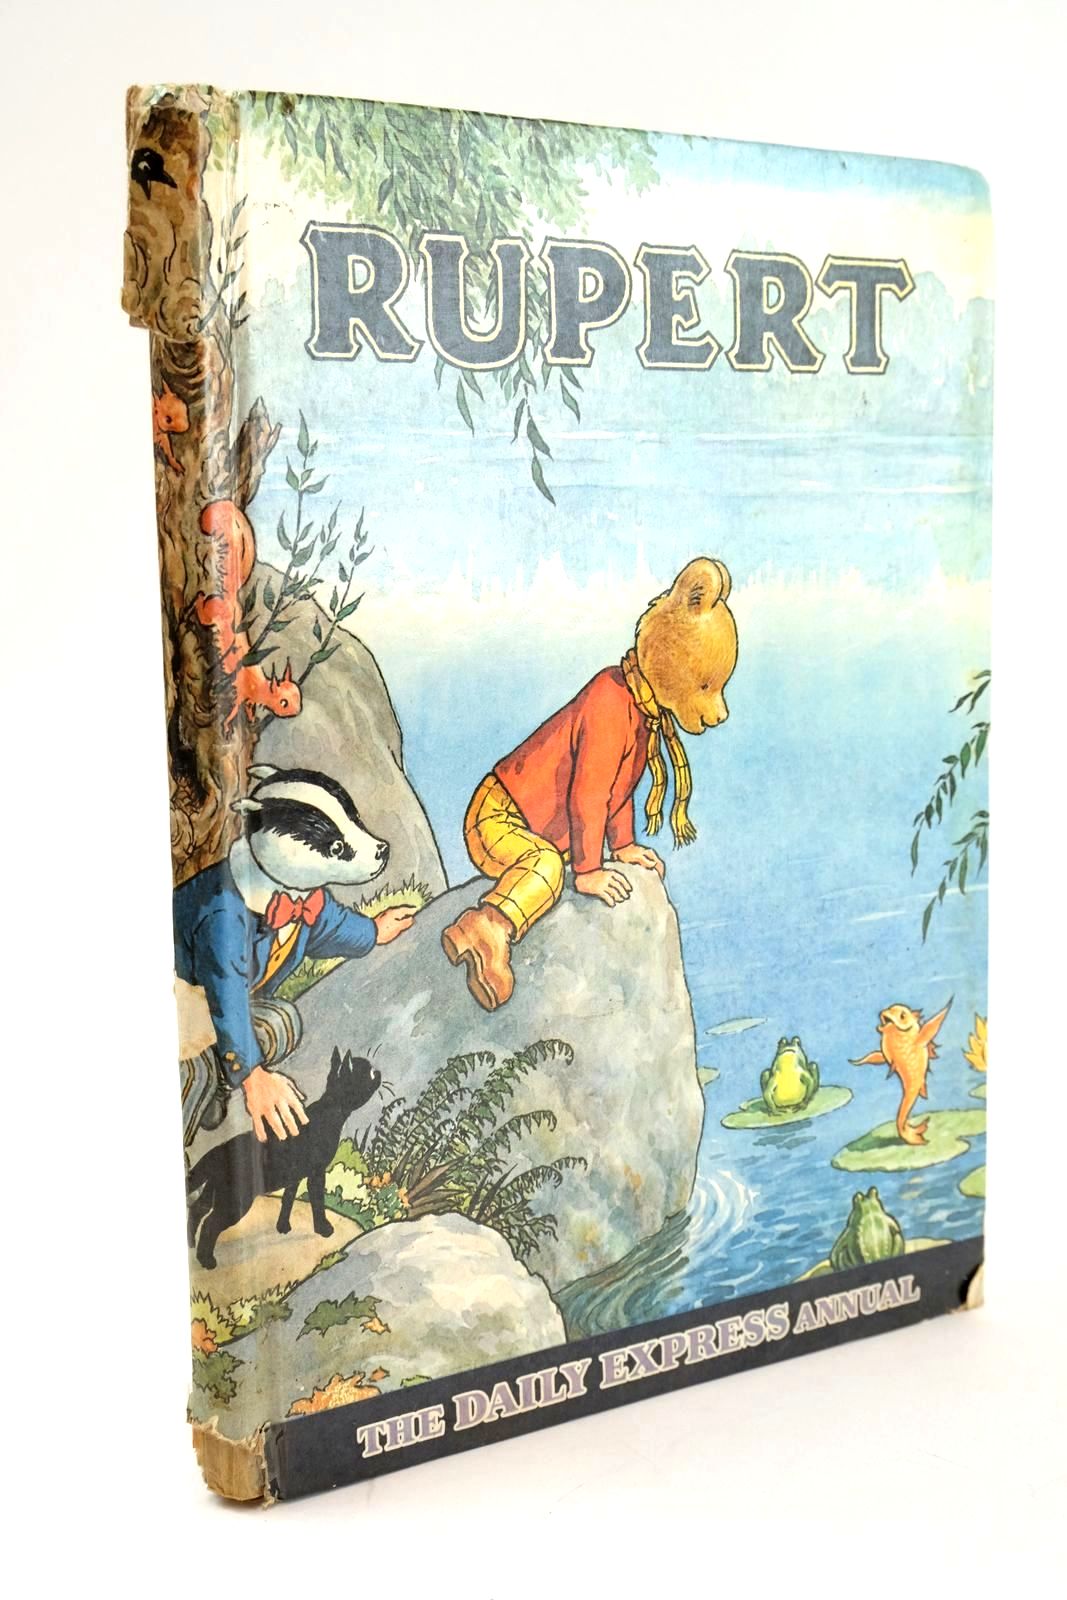 Photo of RUPERT ANNUAL 1969 written by Bestall, Alfred illustrated by Bestall, Alfred published by Daily Express (STOCK CODE: 1324986)  for sale by Stella & Rose's Books